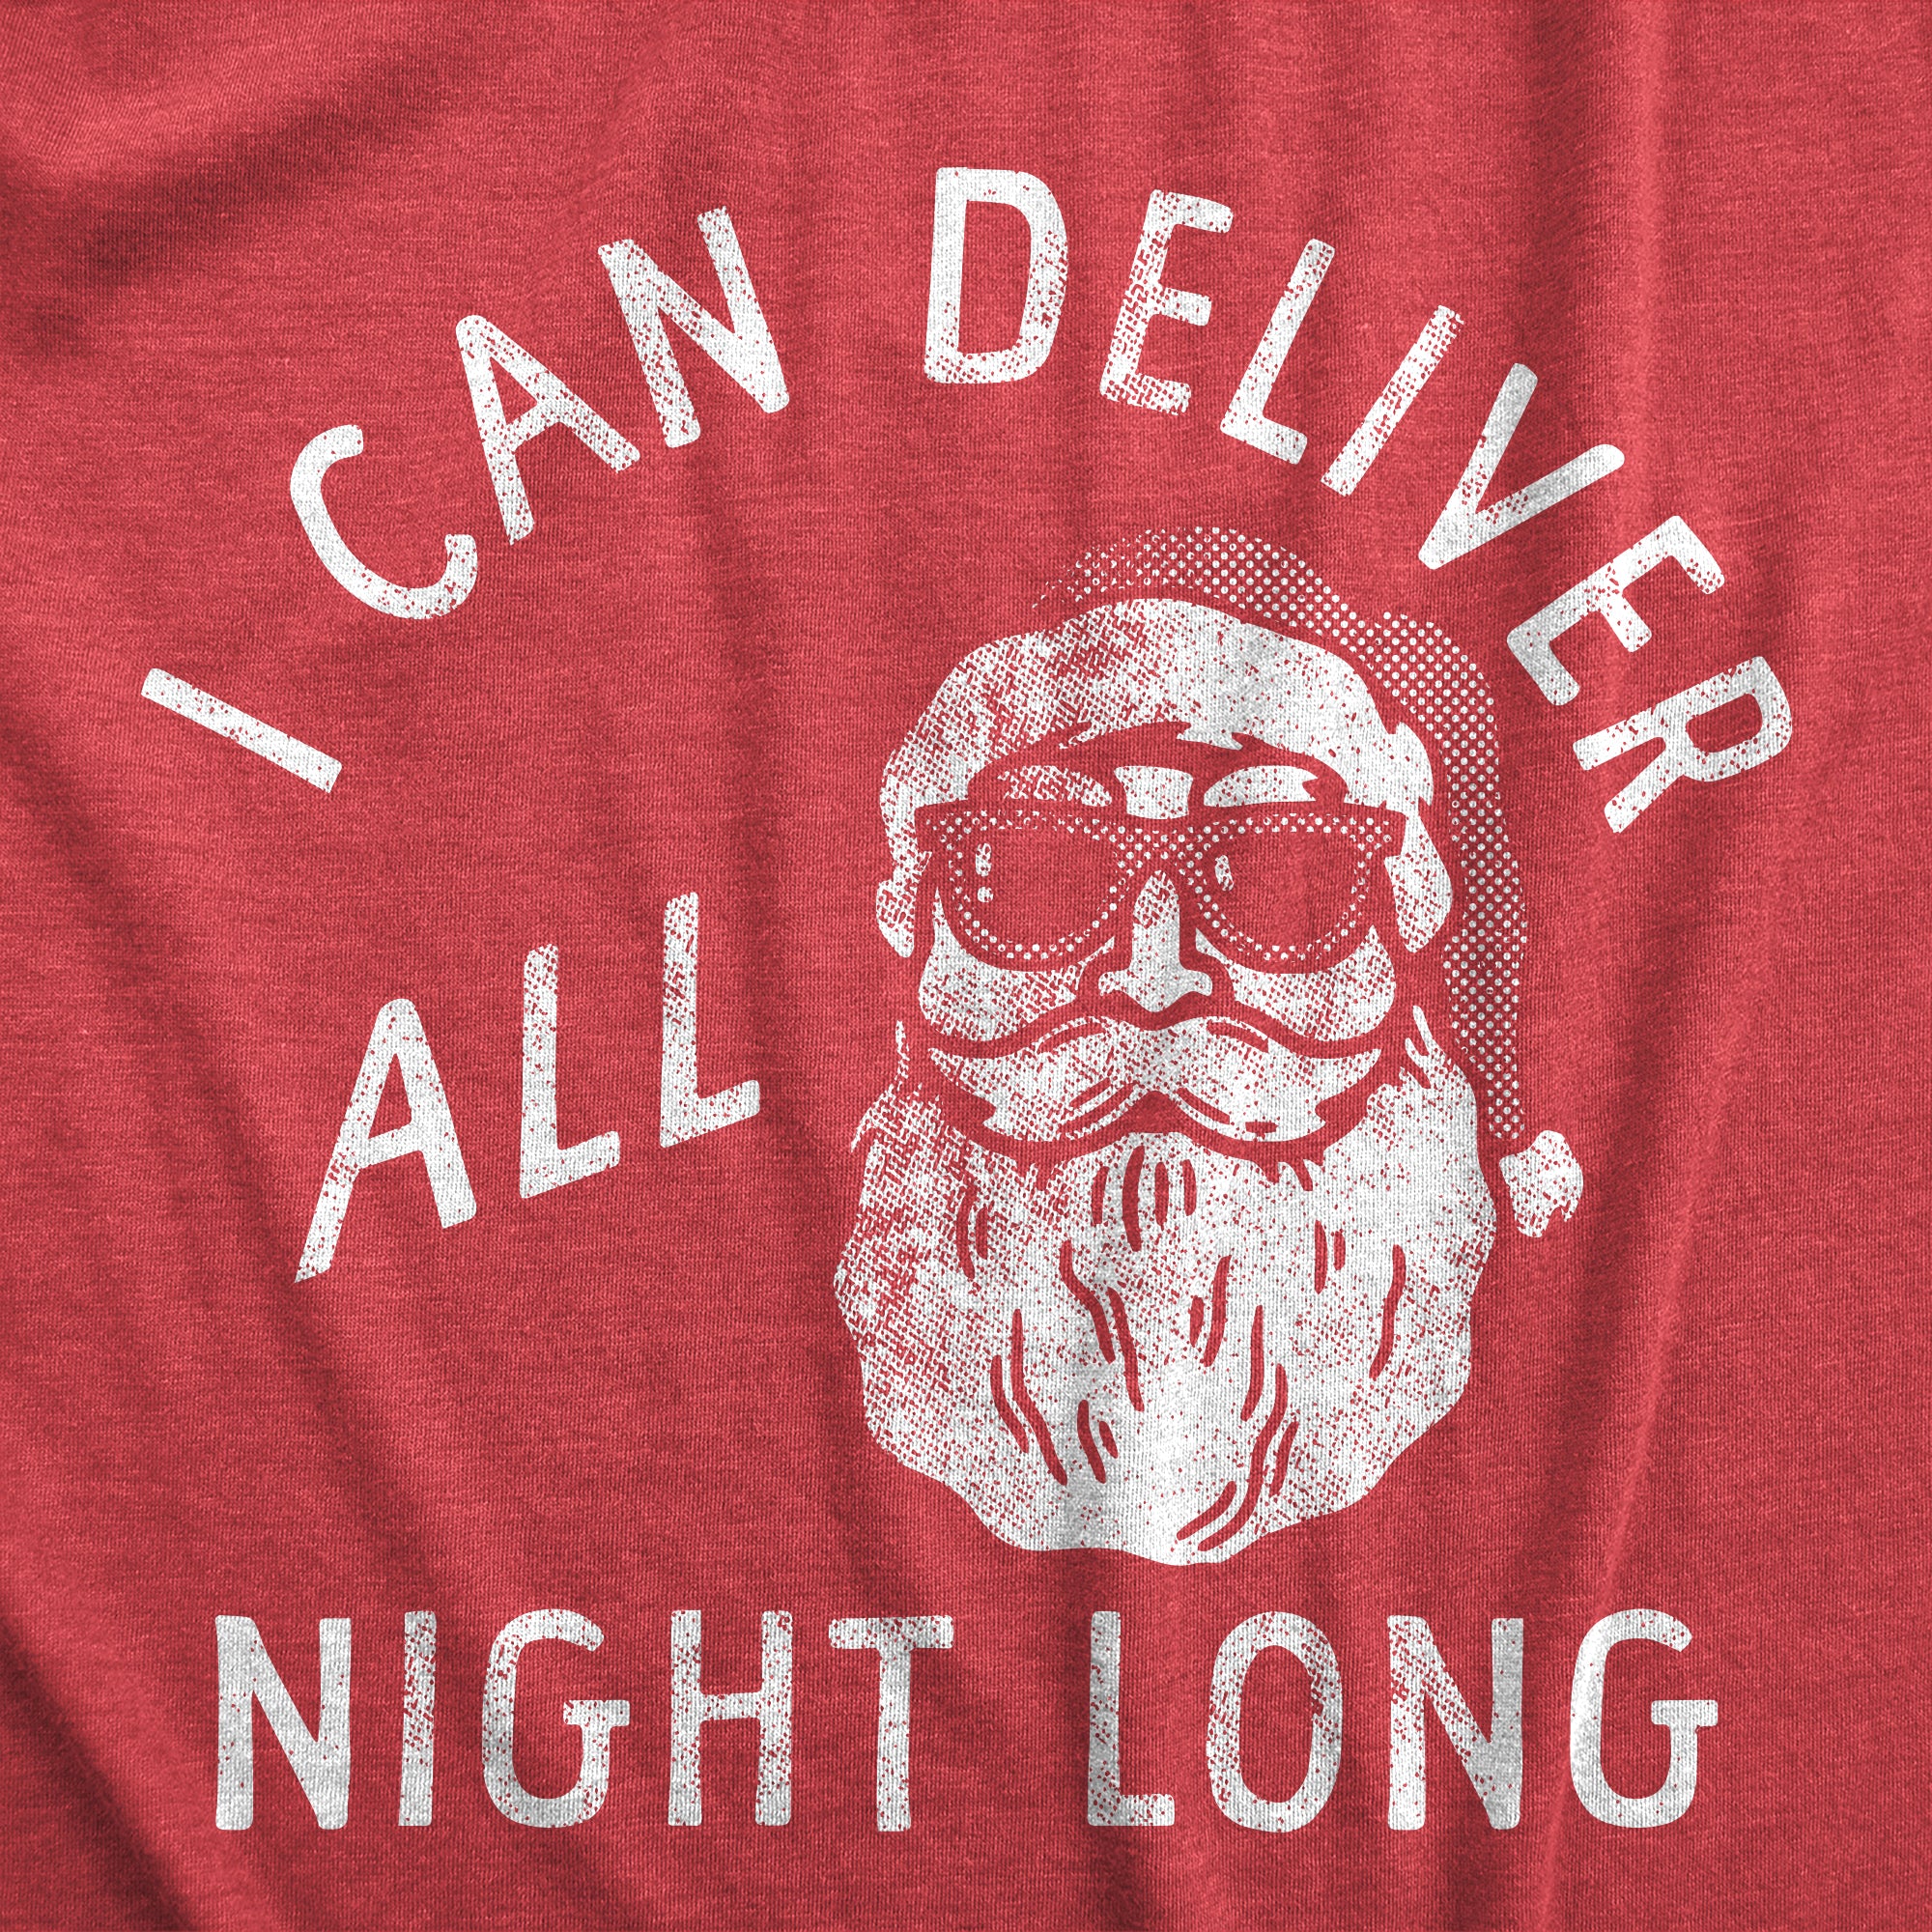 Funny Heather Red - All Night Long I Can Deliver All Night Long Mens T Shirt Nerdy Christmas Sex Sex Tee